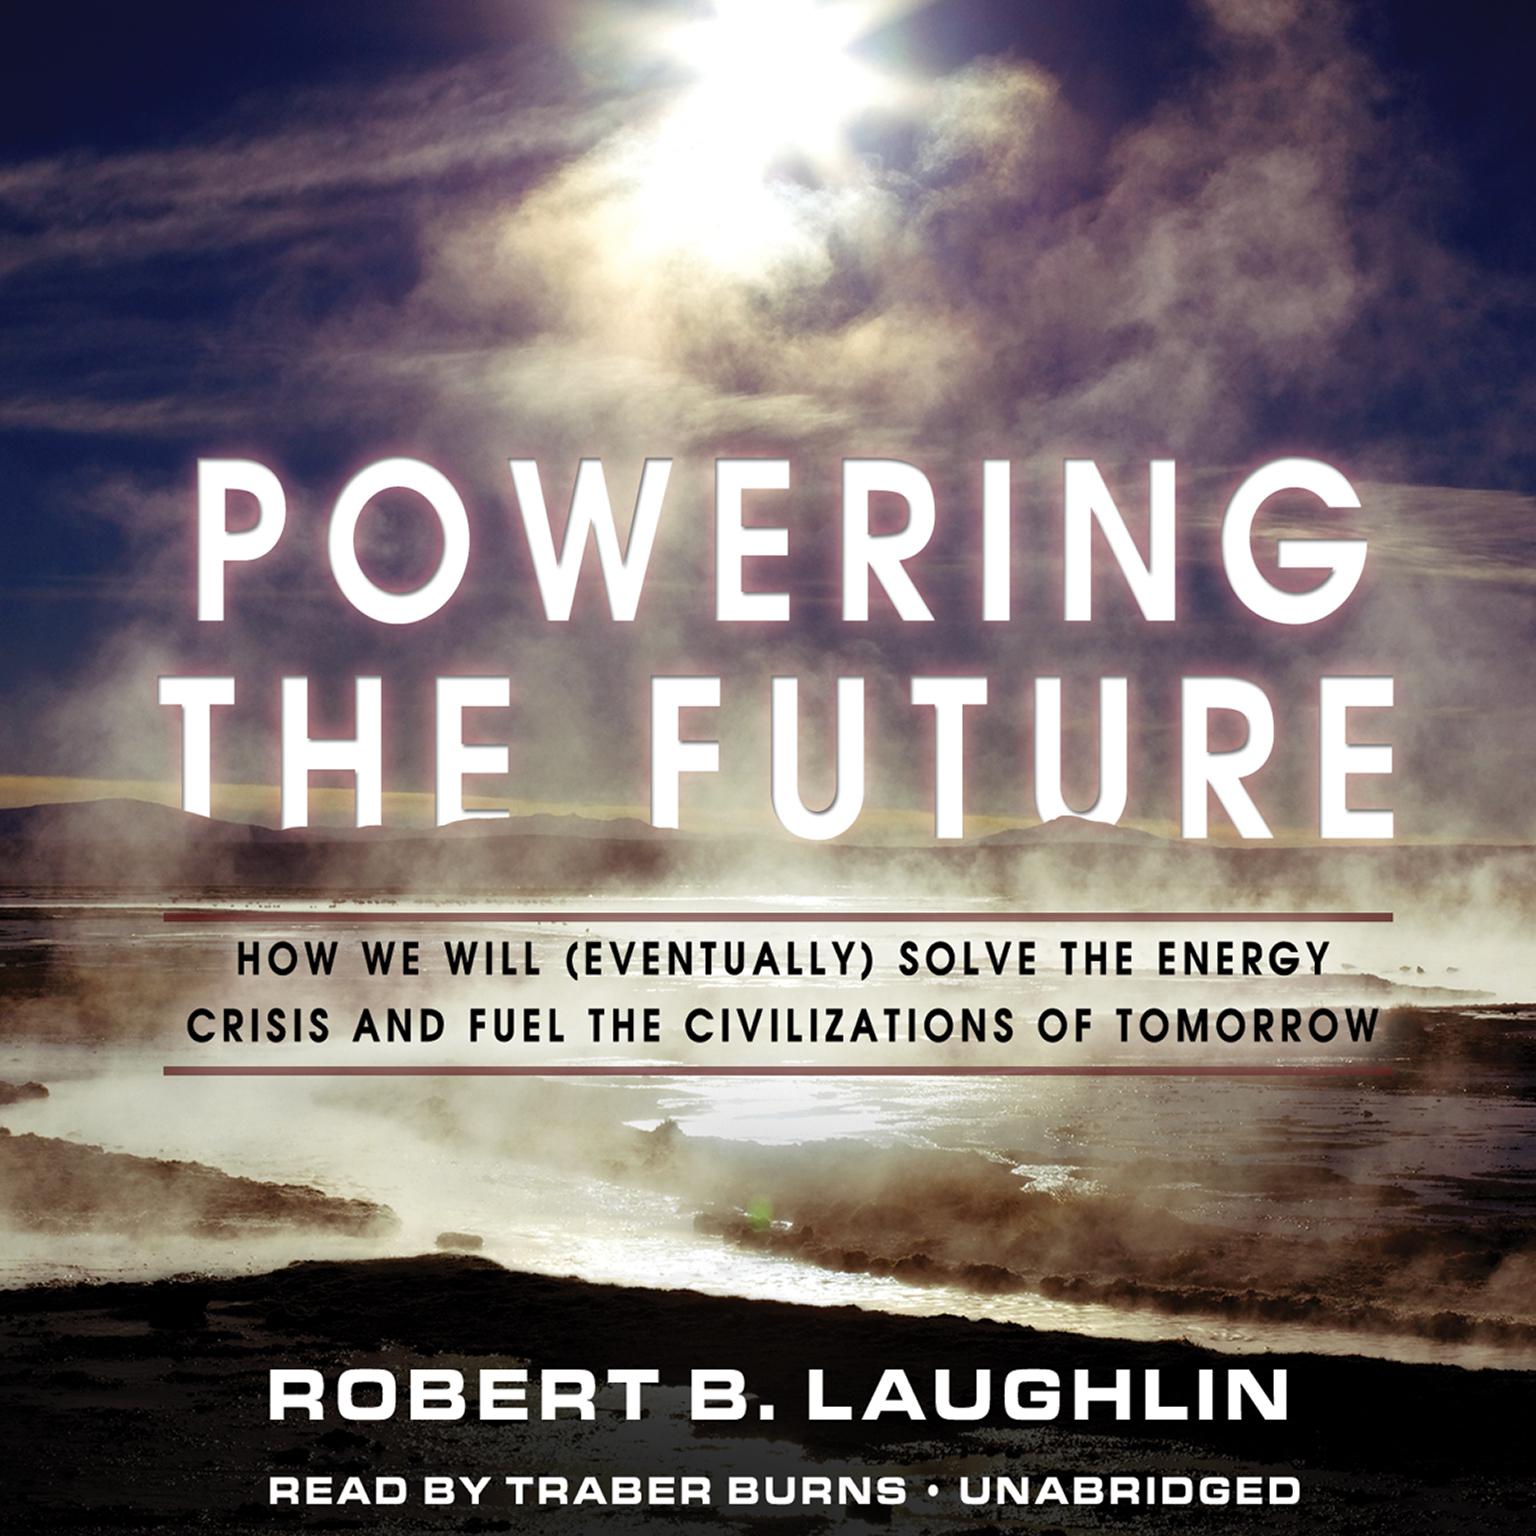 Powering the Future: How We Will (Eventually) Solve the Energy Crisis and Fuel the Civilization of Tomorrow Audiobook, by Robert B. Laughlin